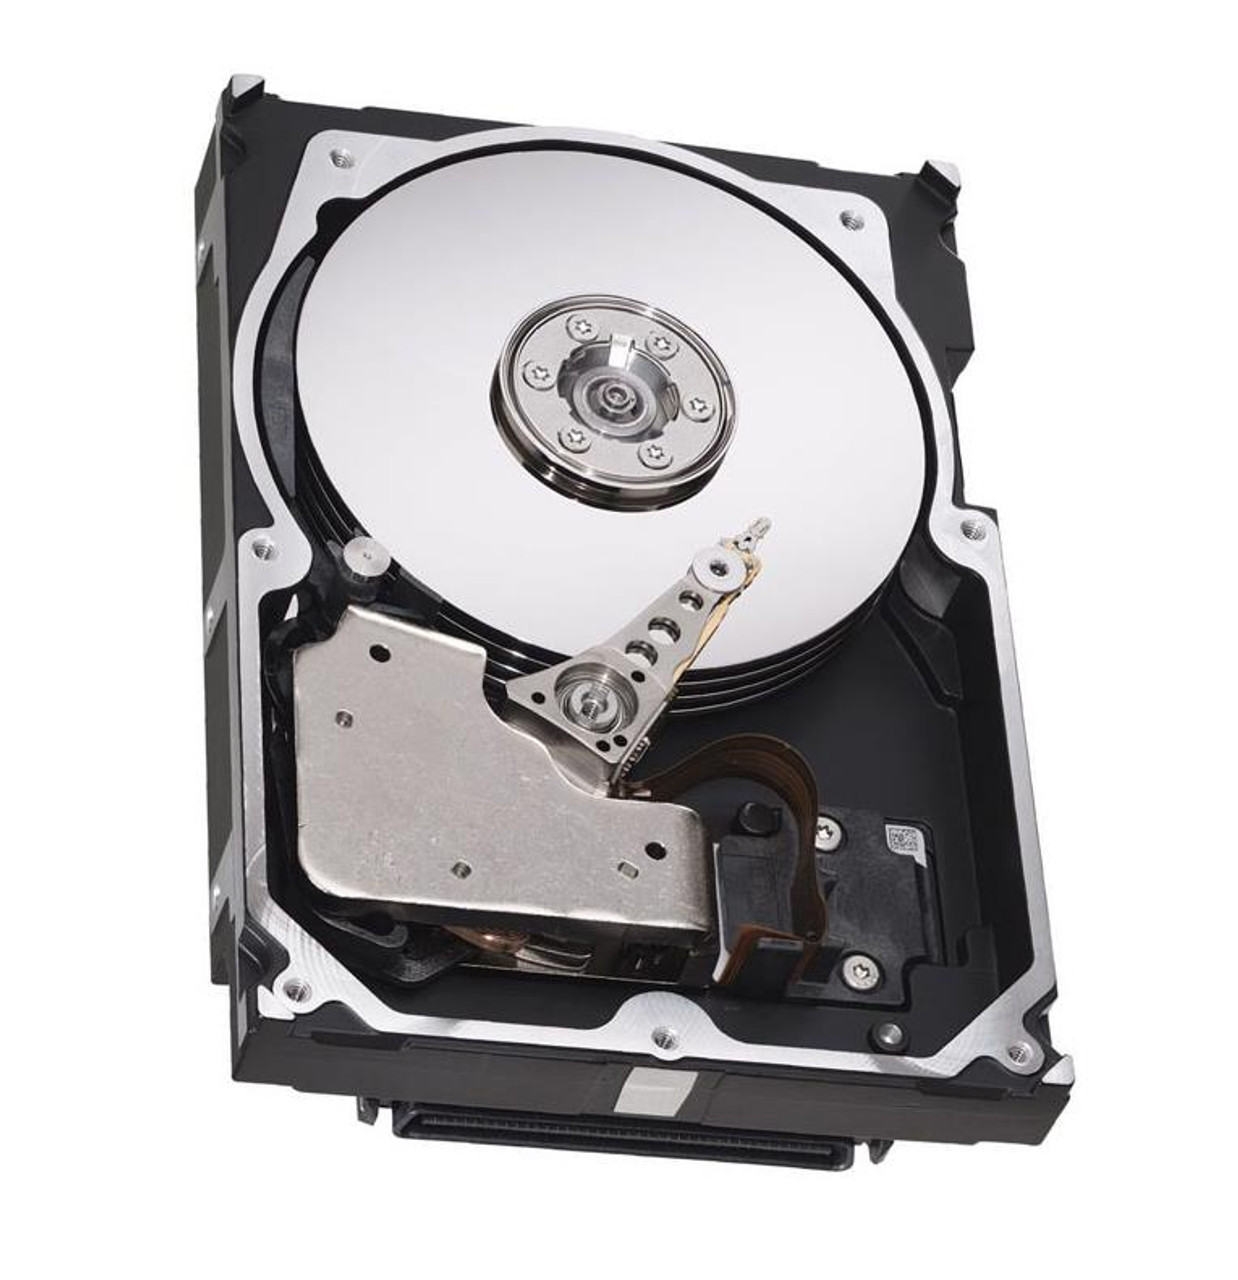 00J115 - Dell 18GB 10000RPM 80-Pin Ultra-160 SCSI Hot Pluggable 3.5-inch Hard Drive with Tray